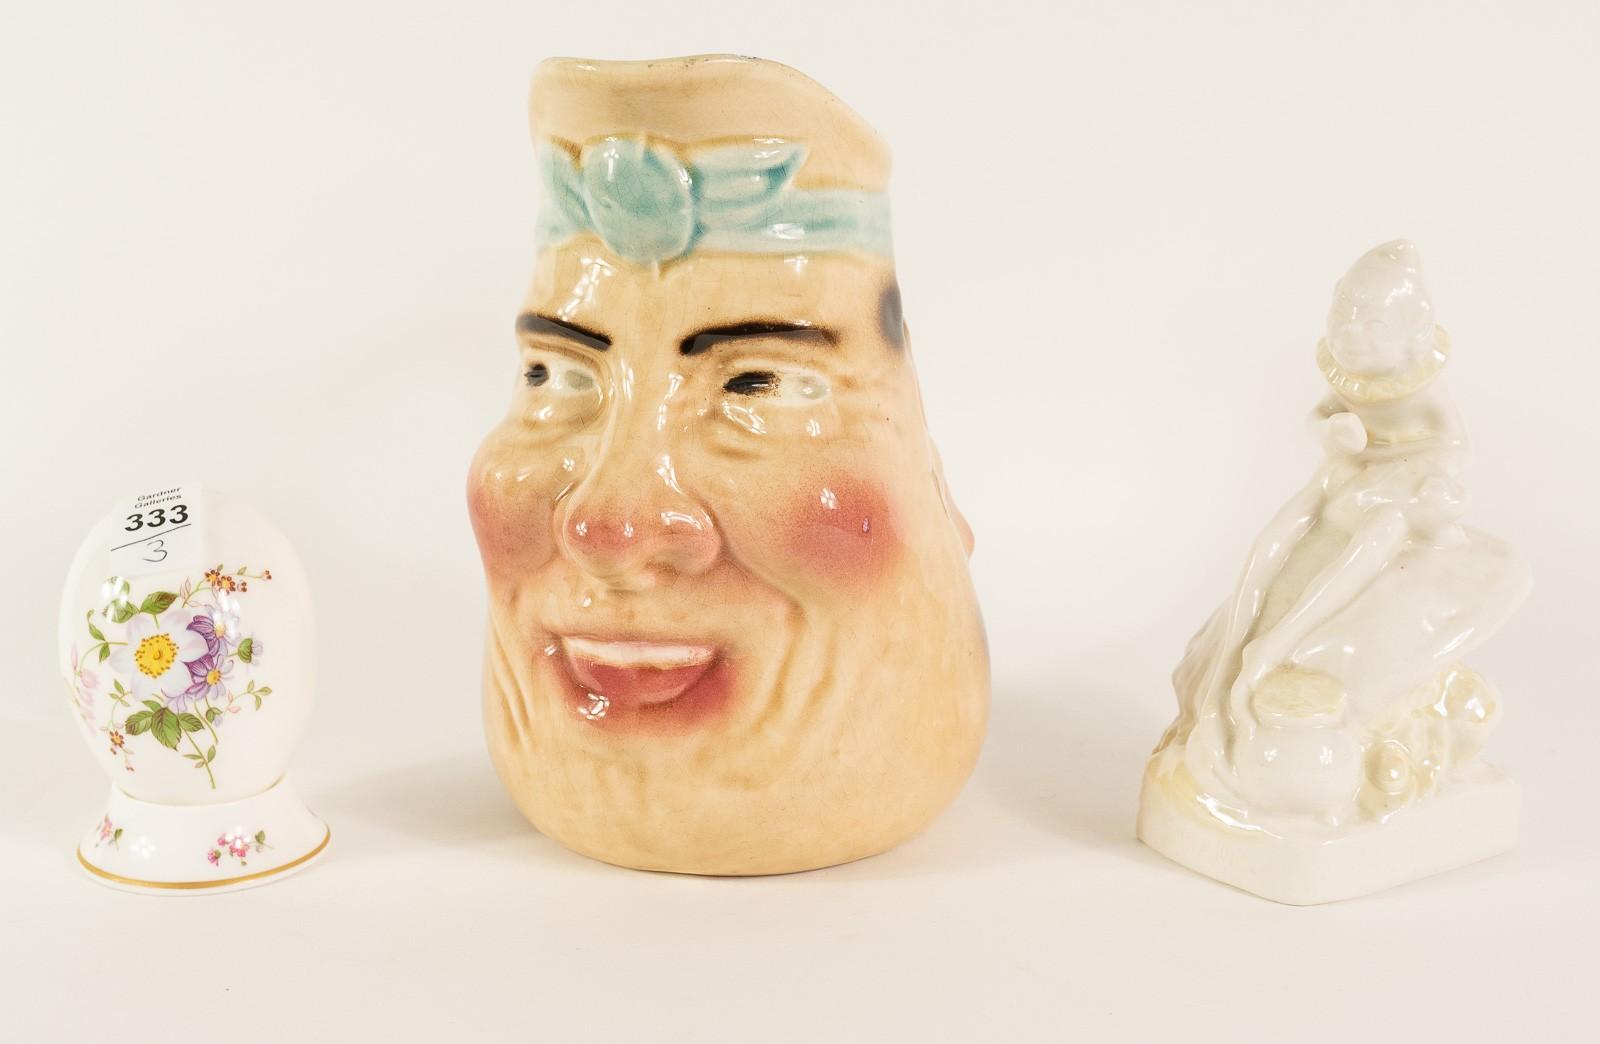 TWO FIGURINES AND JUG